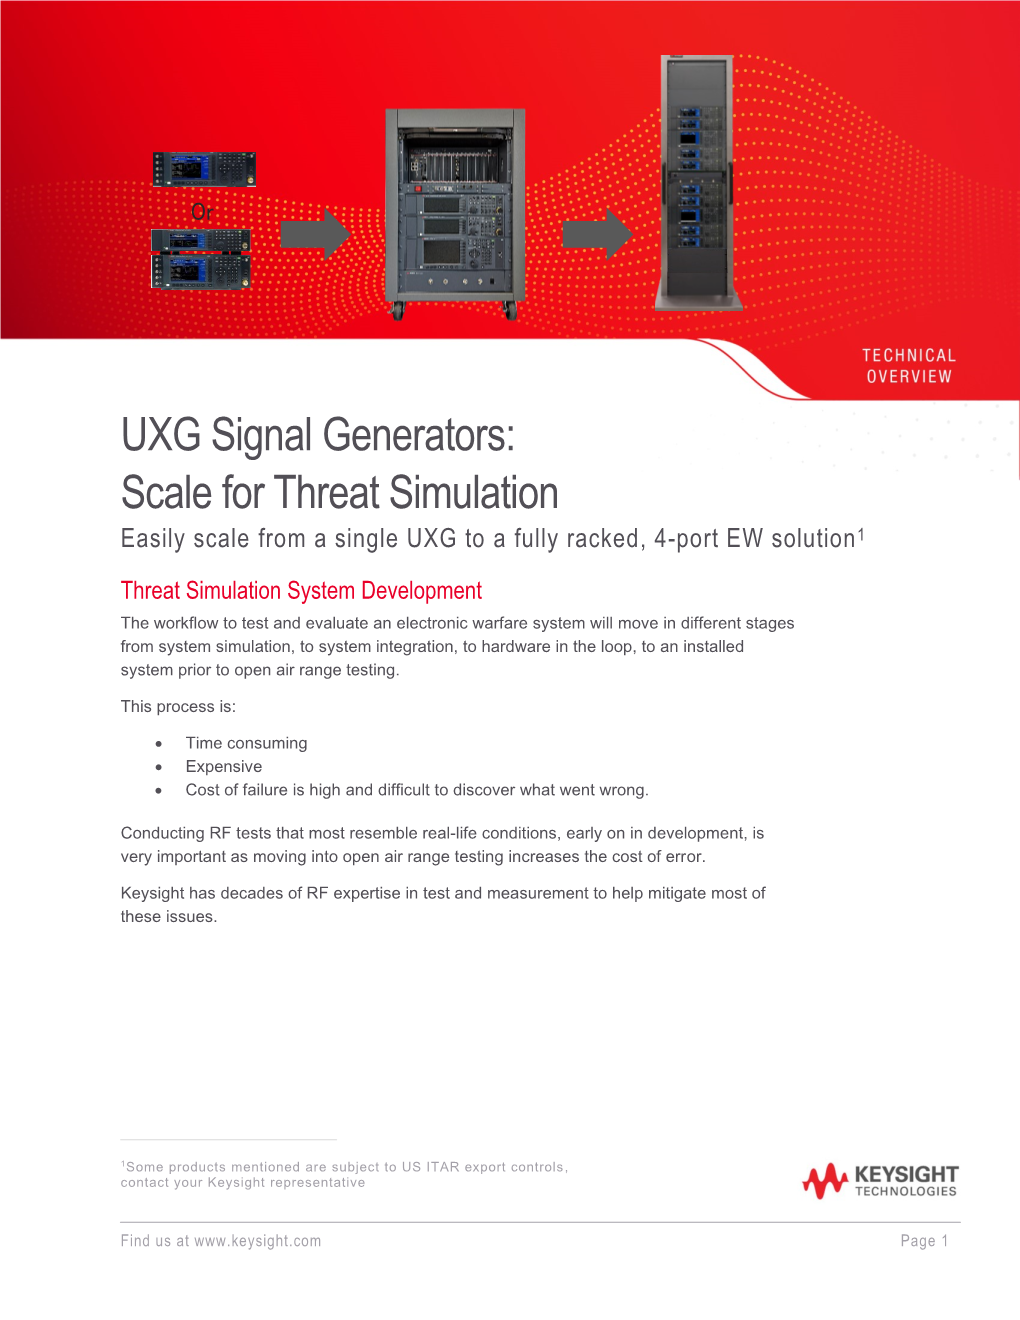 UXG Signal Generators: Scale for Threat Simulation Easily Scale from a Single UXG to a Fully Racked, 4-Port EW Solution1